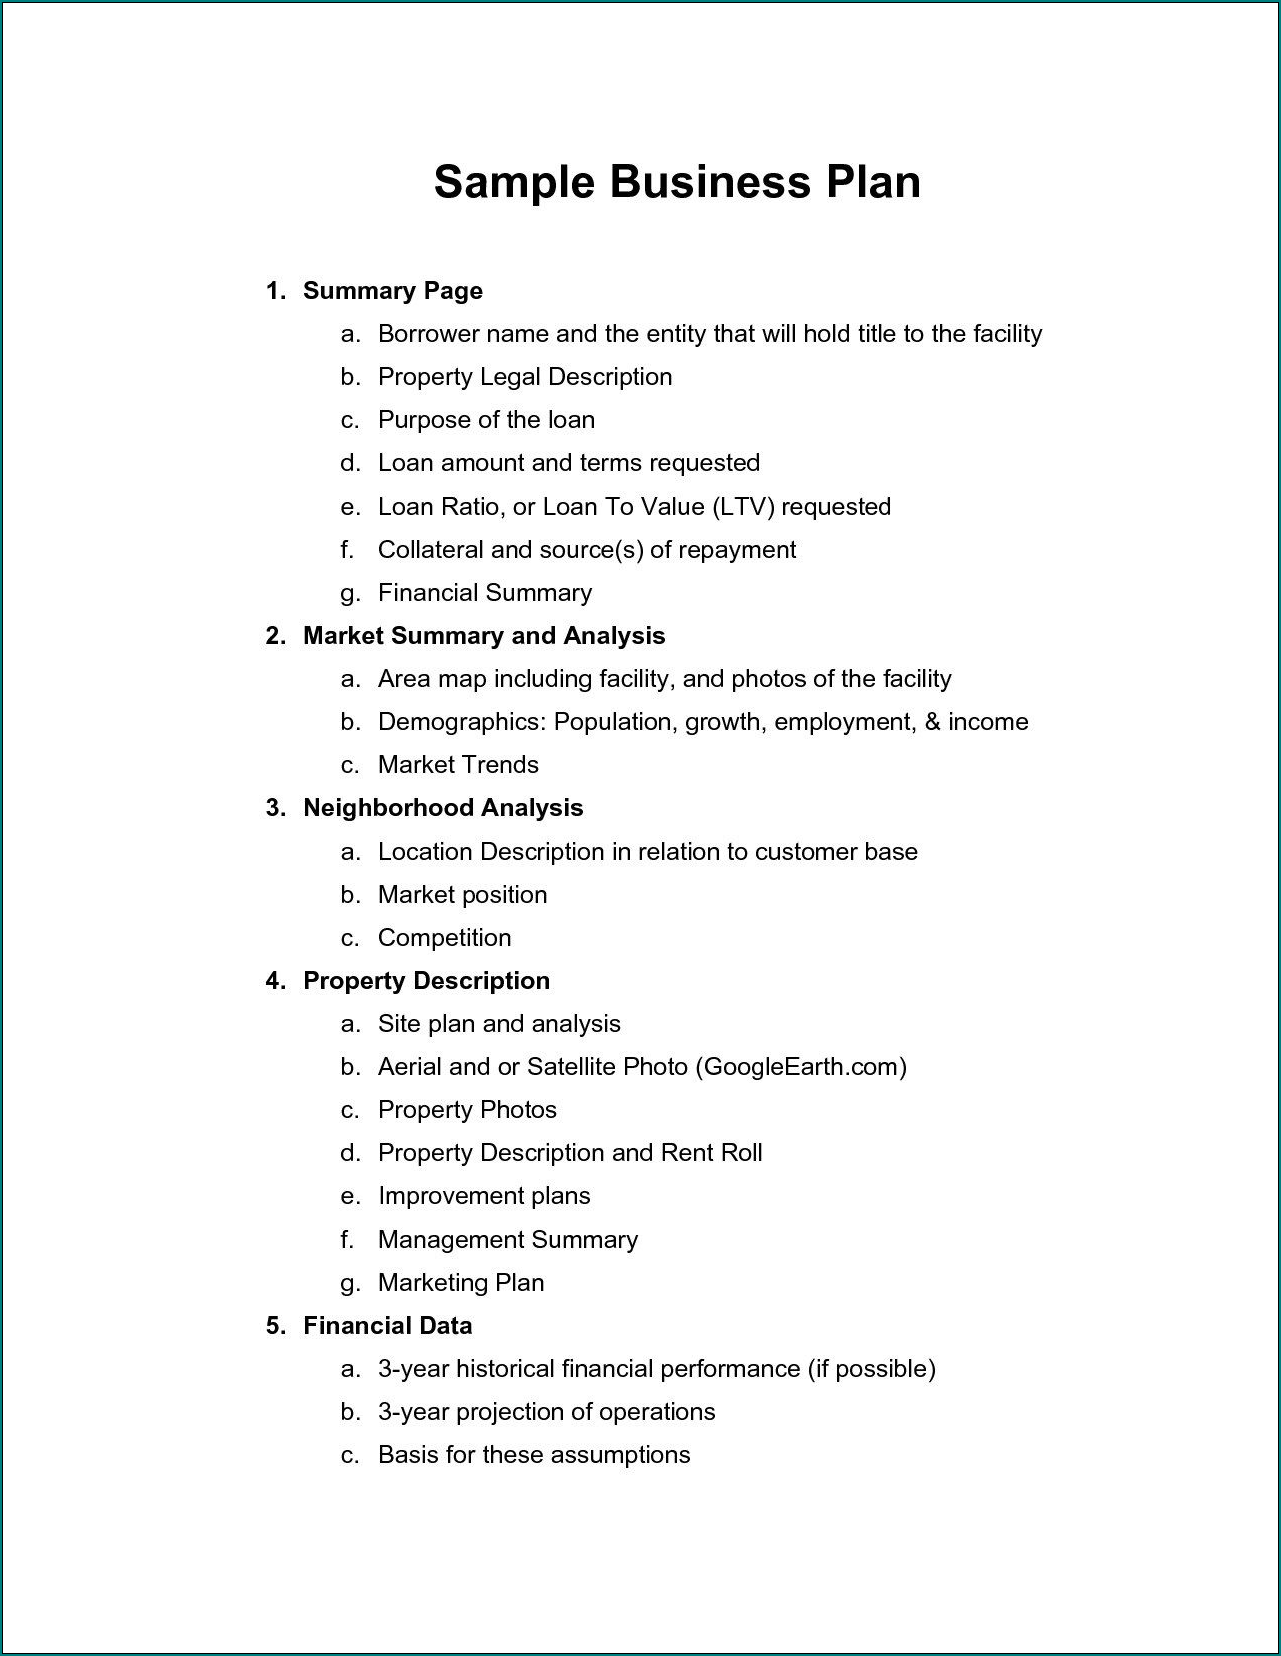 a simple business plan template